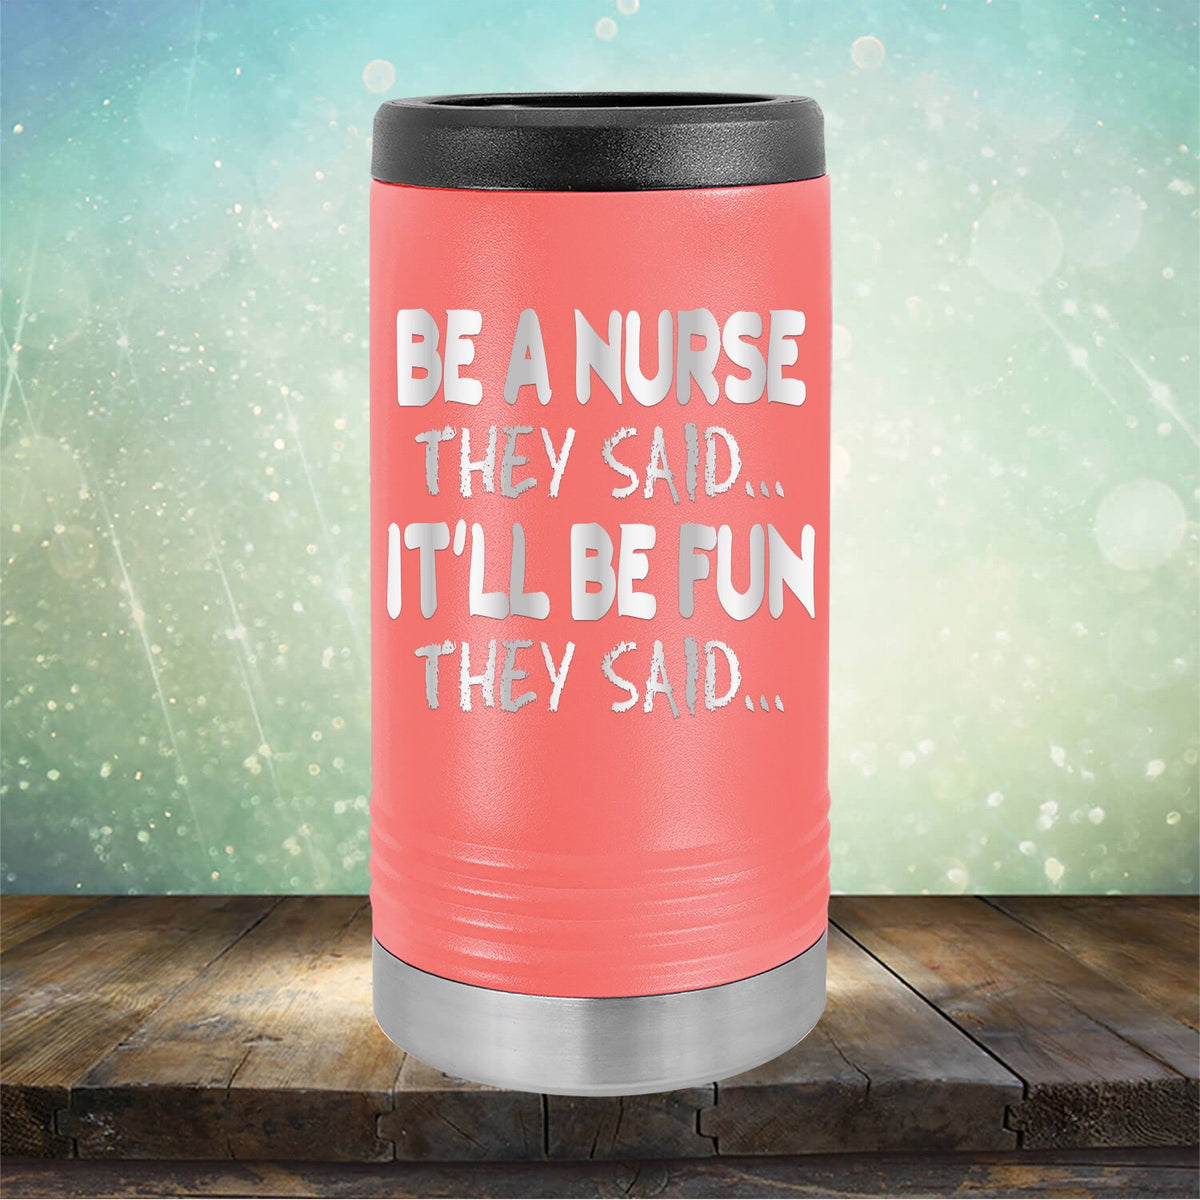 Be A Nurse They Said... It&#39;ll Be Fun They Said - Laser Etched Tumbler Mug